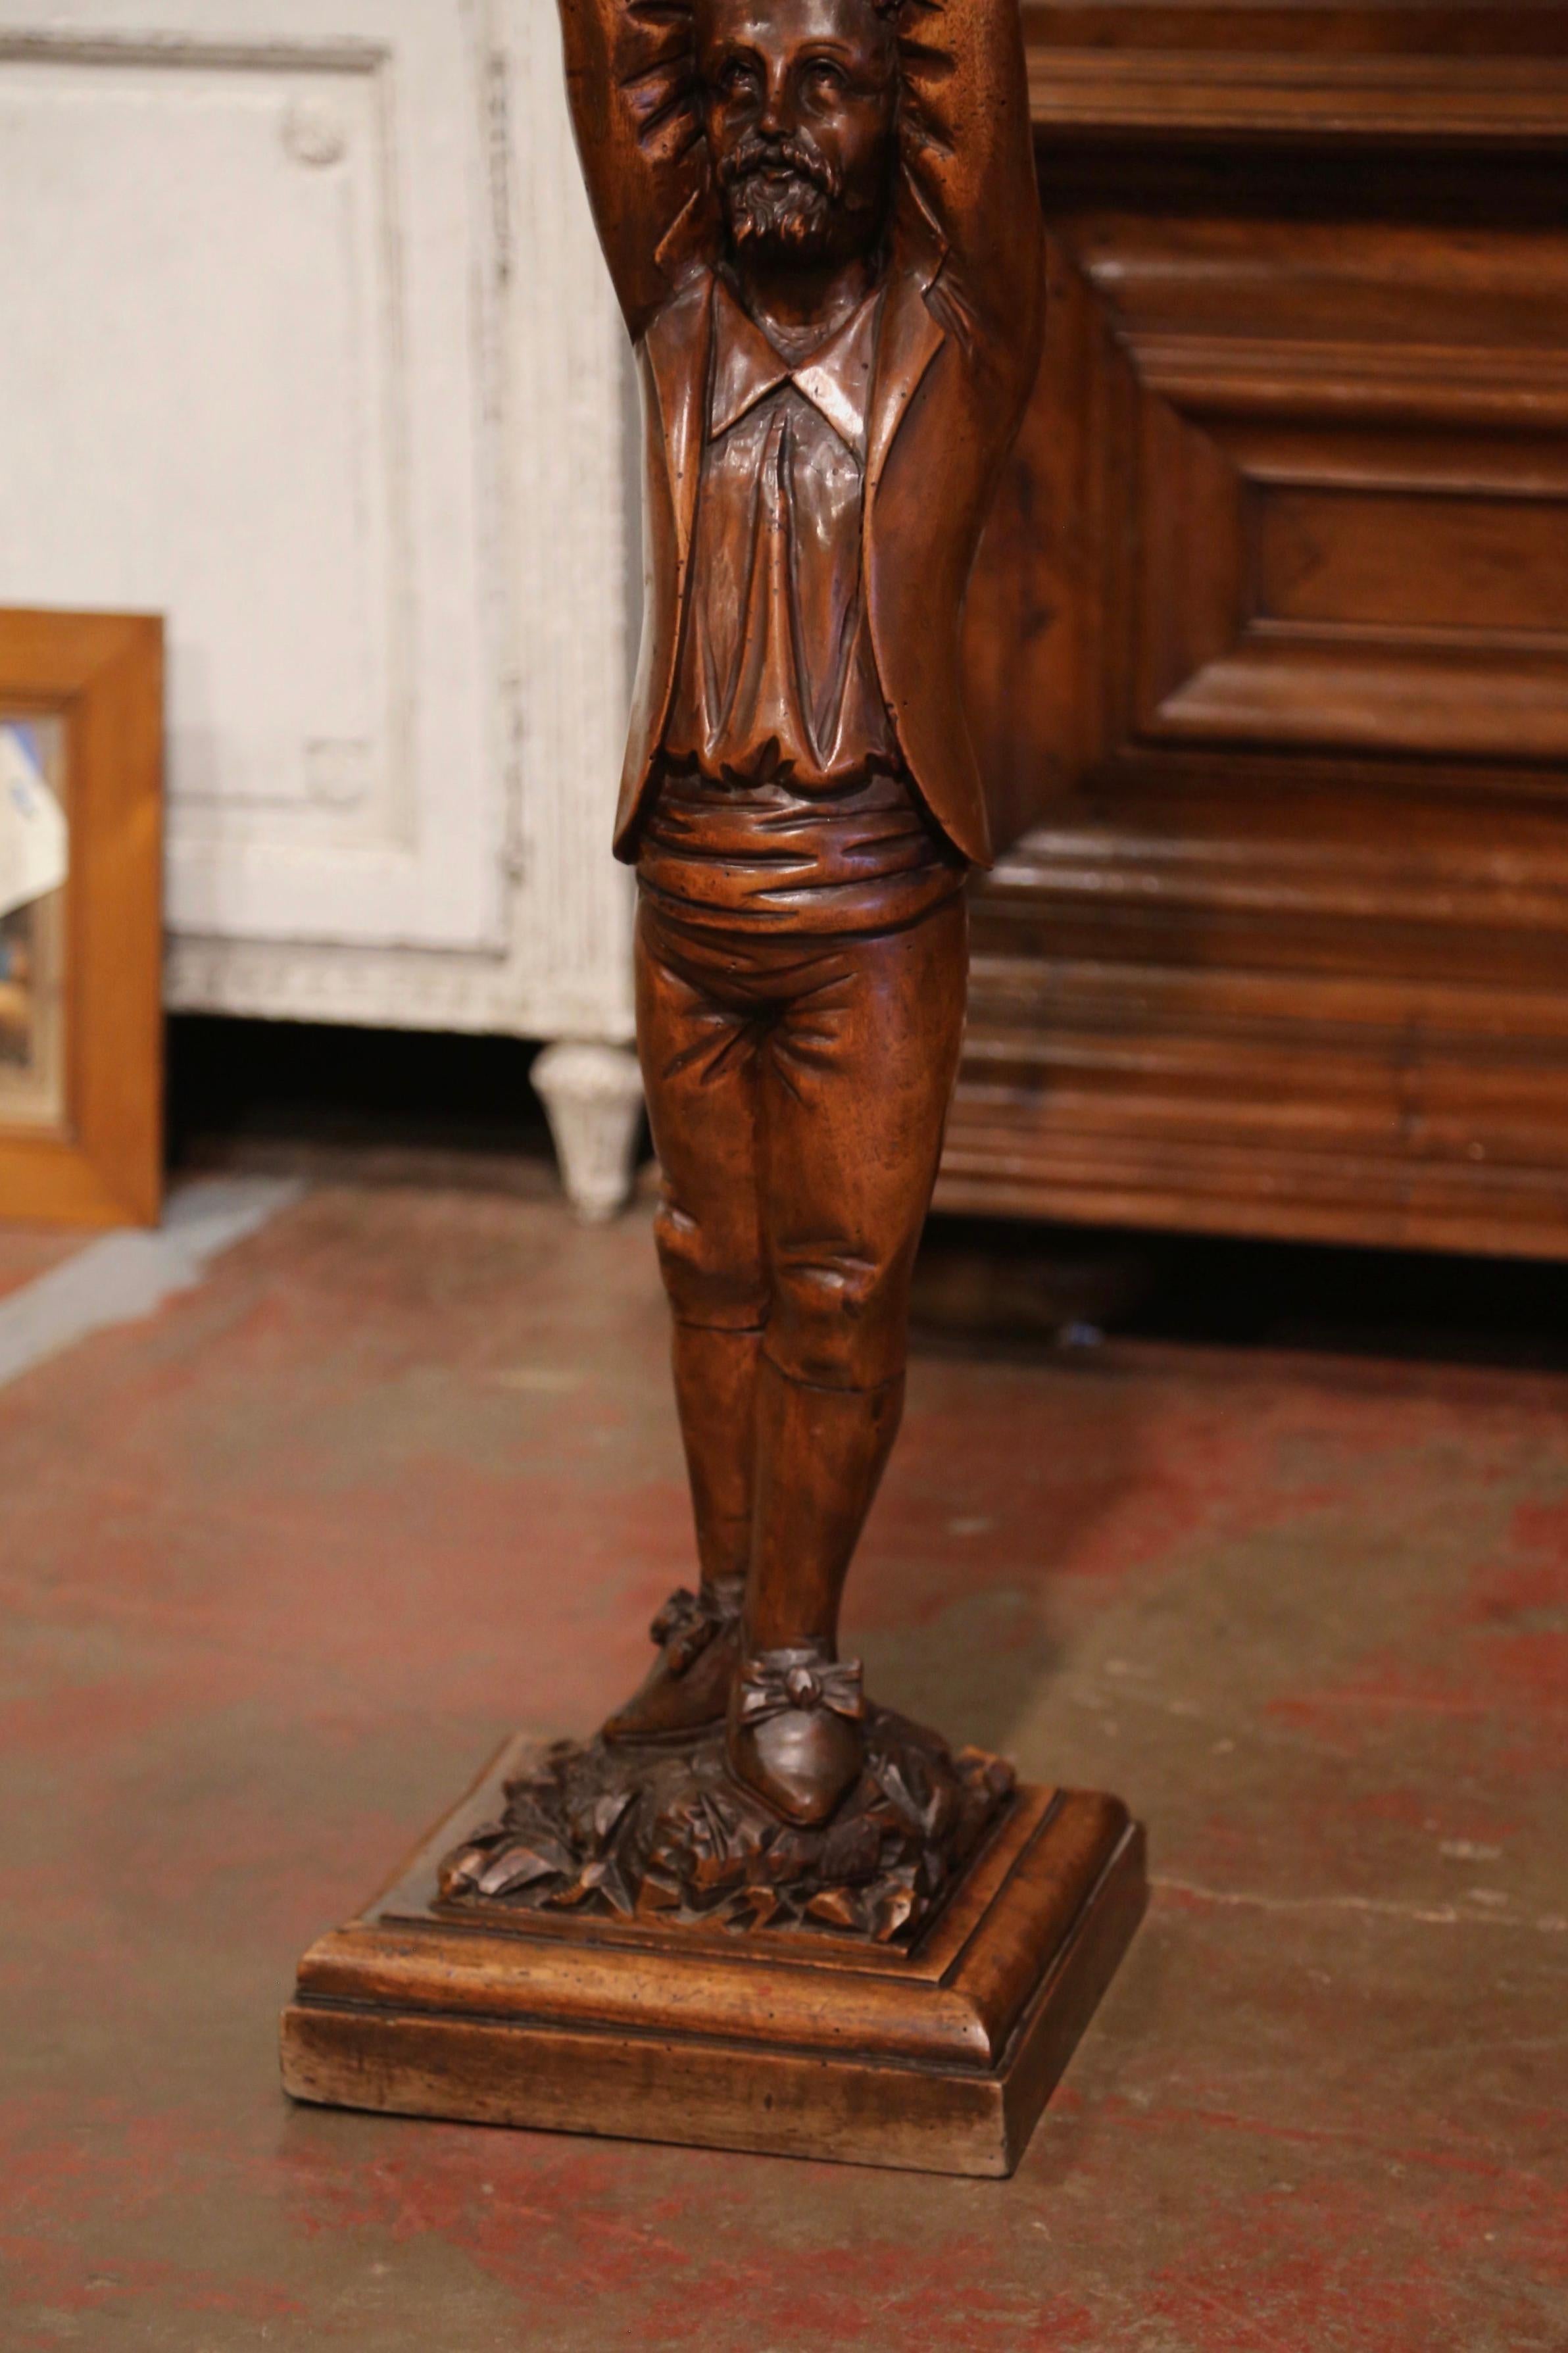 Country Mid-19th Century French Carved Walnut Pedestal Table with Gentleman Sculpture For Sale